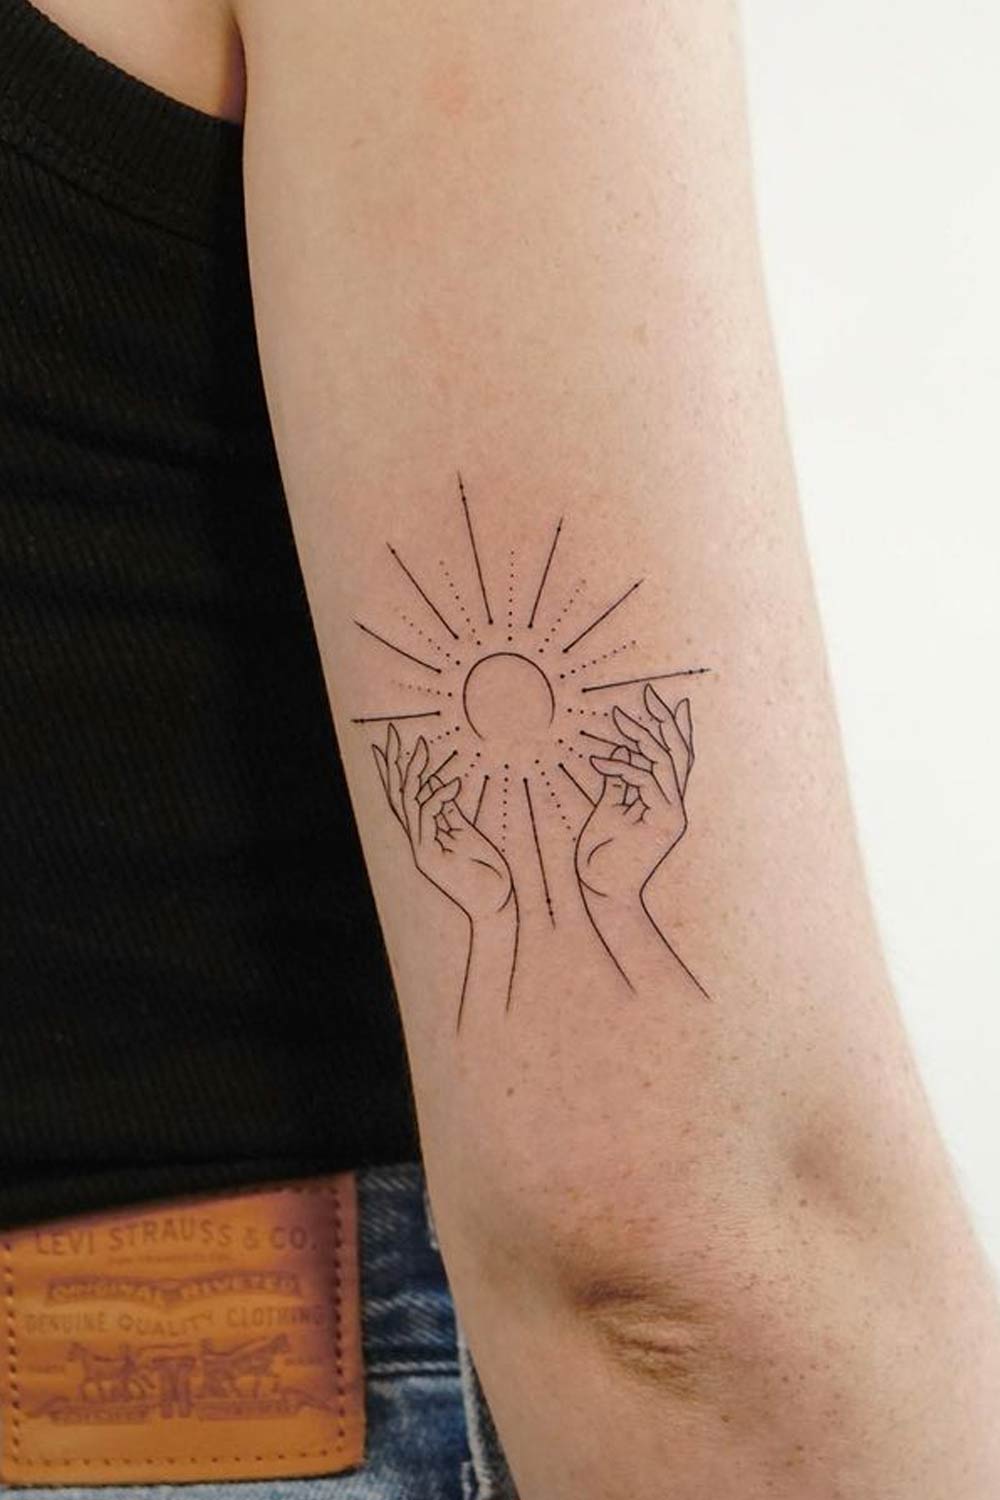 The Sun with Hands Tattoo